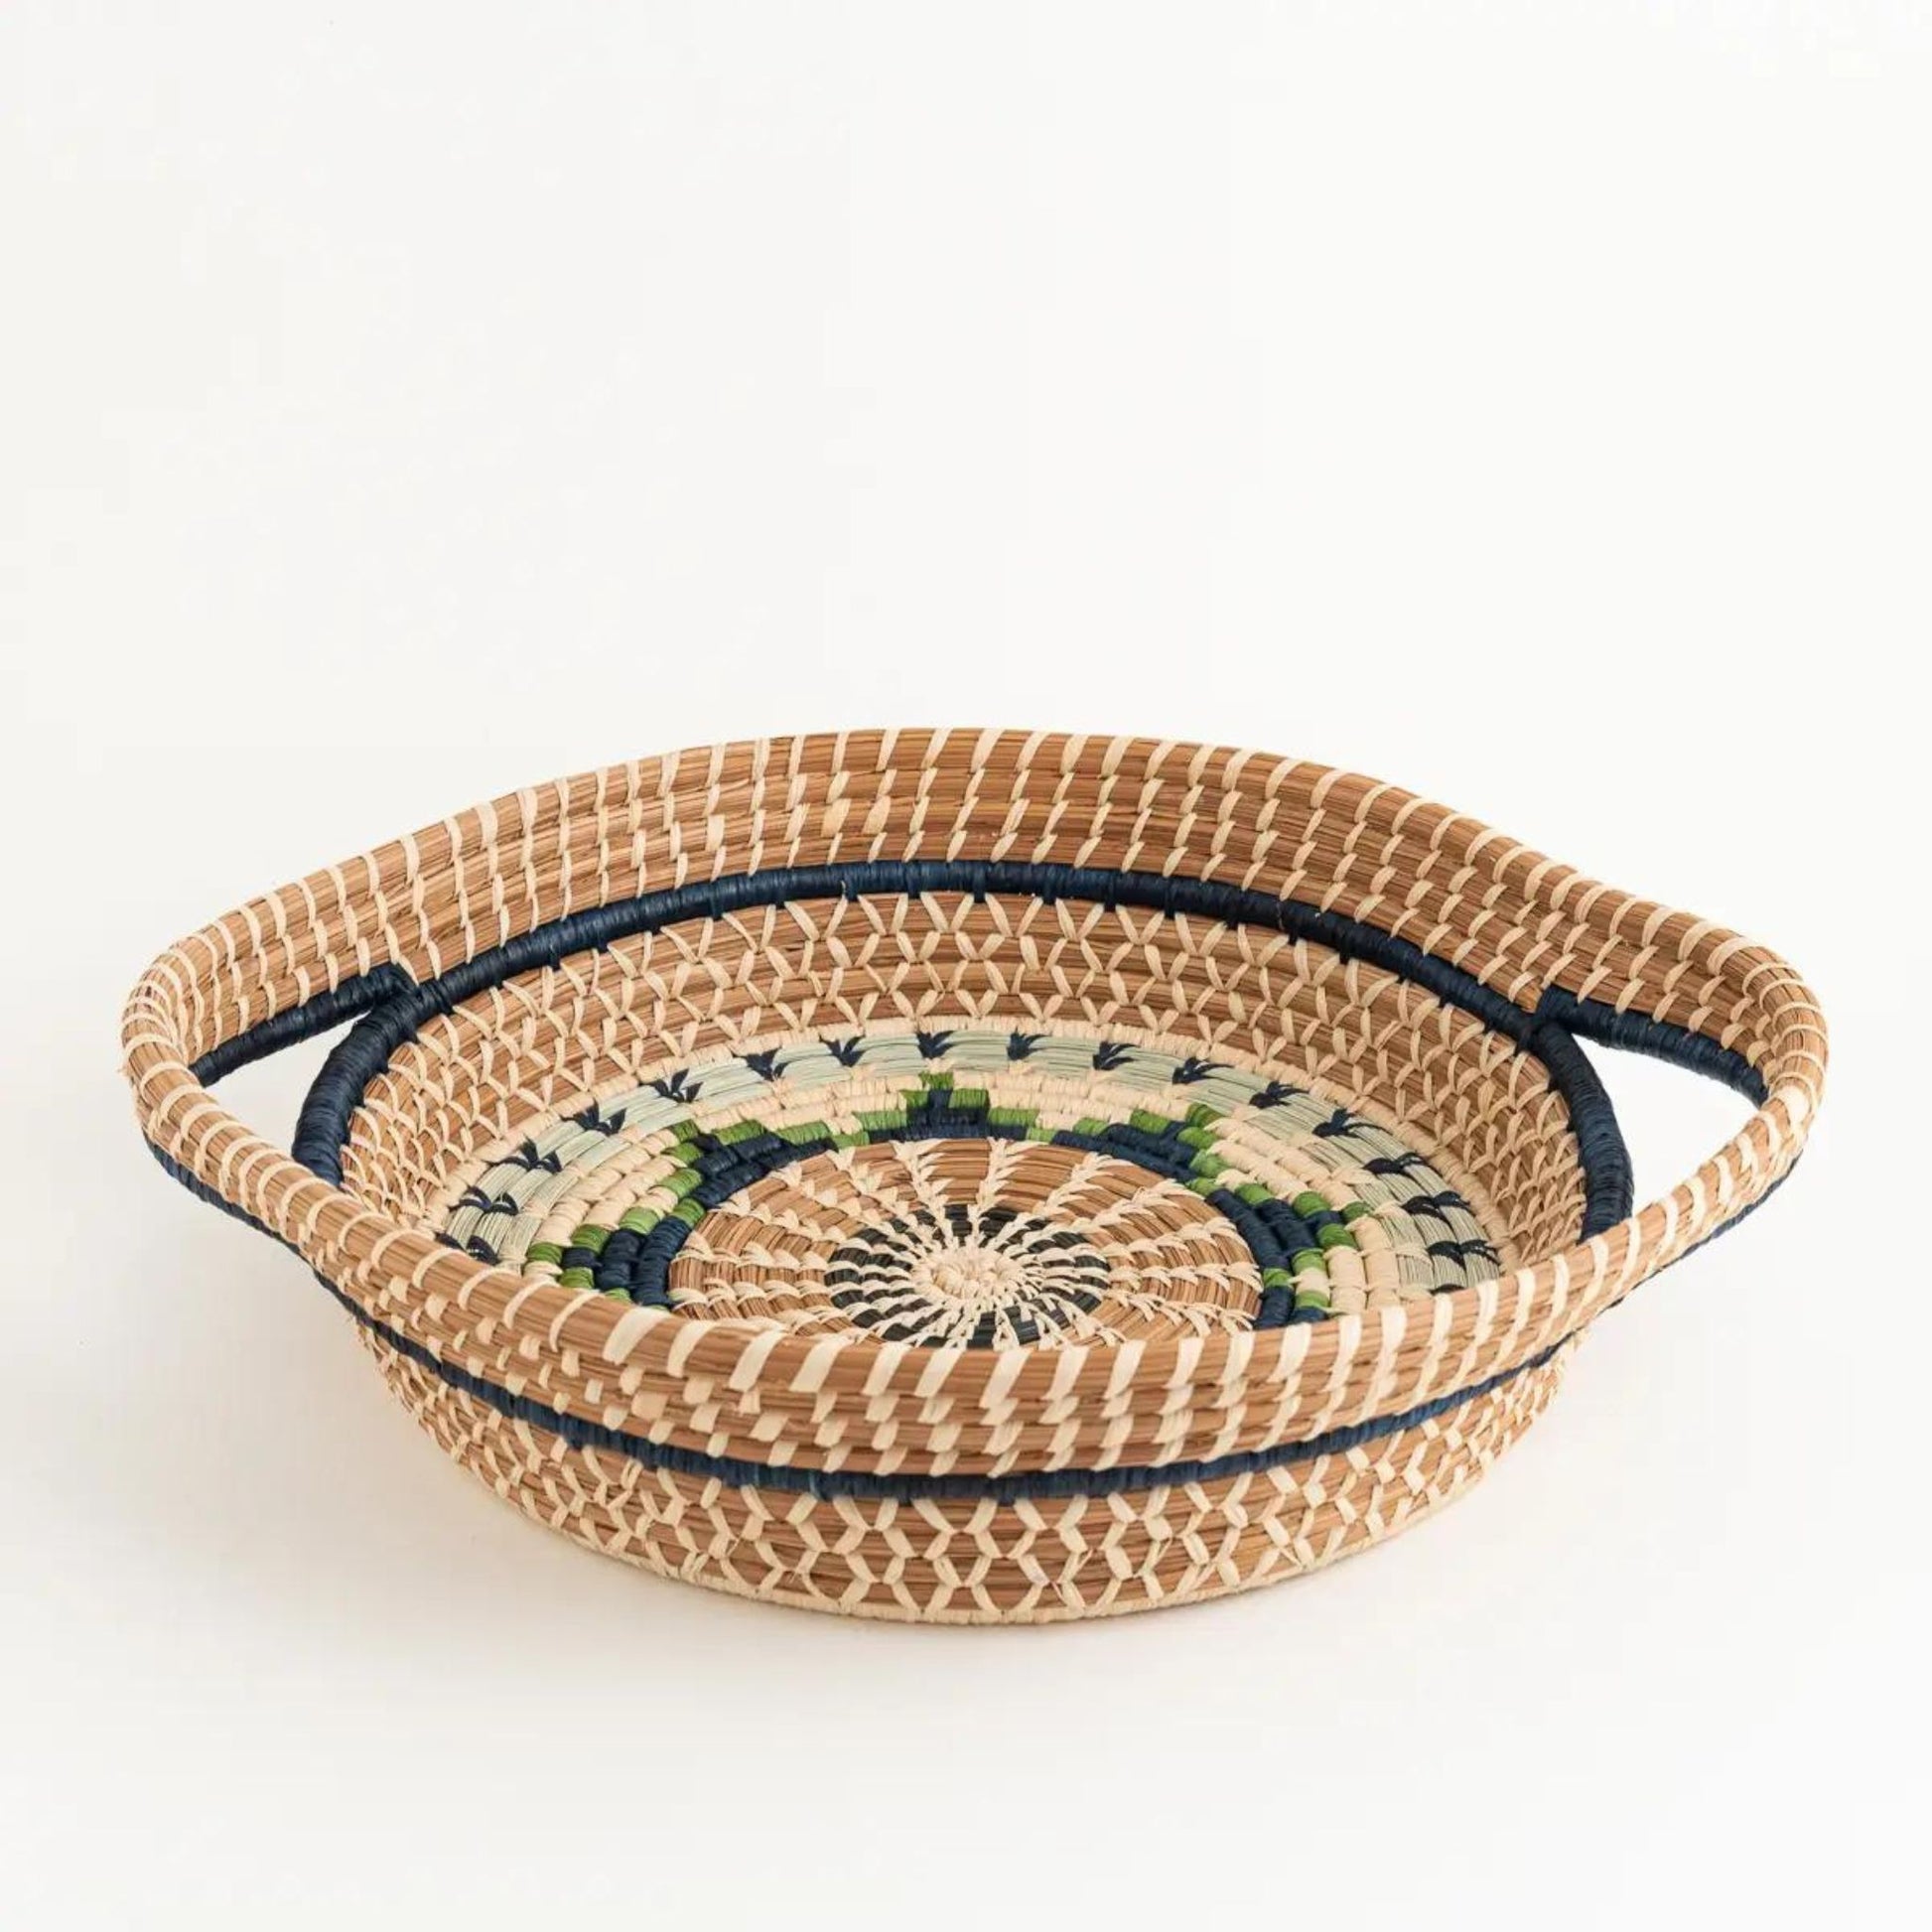 Chumil Pine Needle Tray Basket. Fair Trade crafted in Guatemala Length: 13 Inches, Width: 10.5 Inches, Height: 2.25 Inches